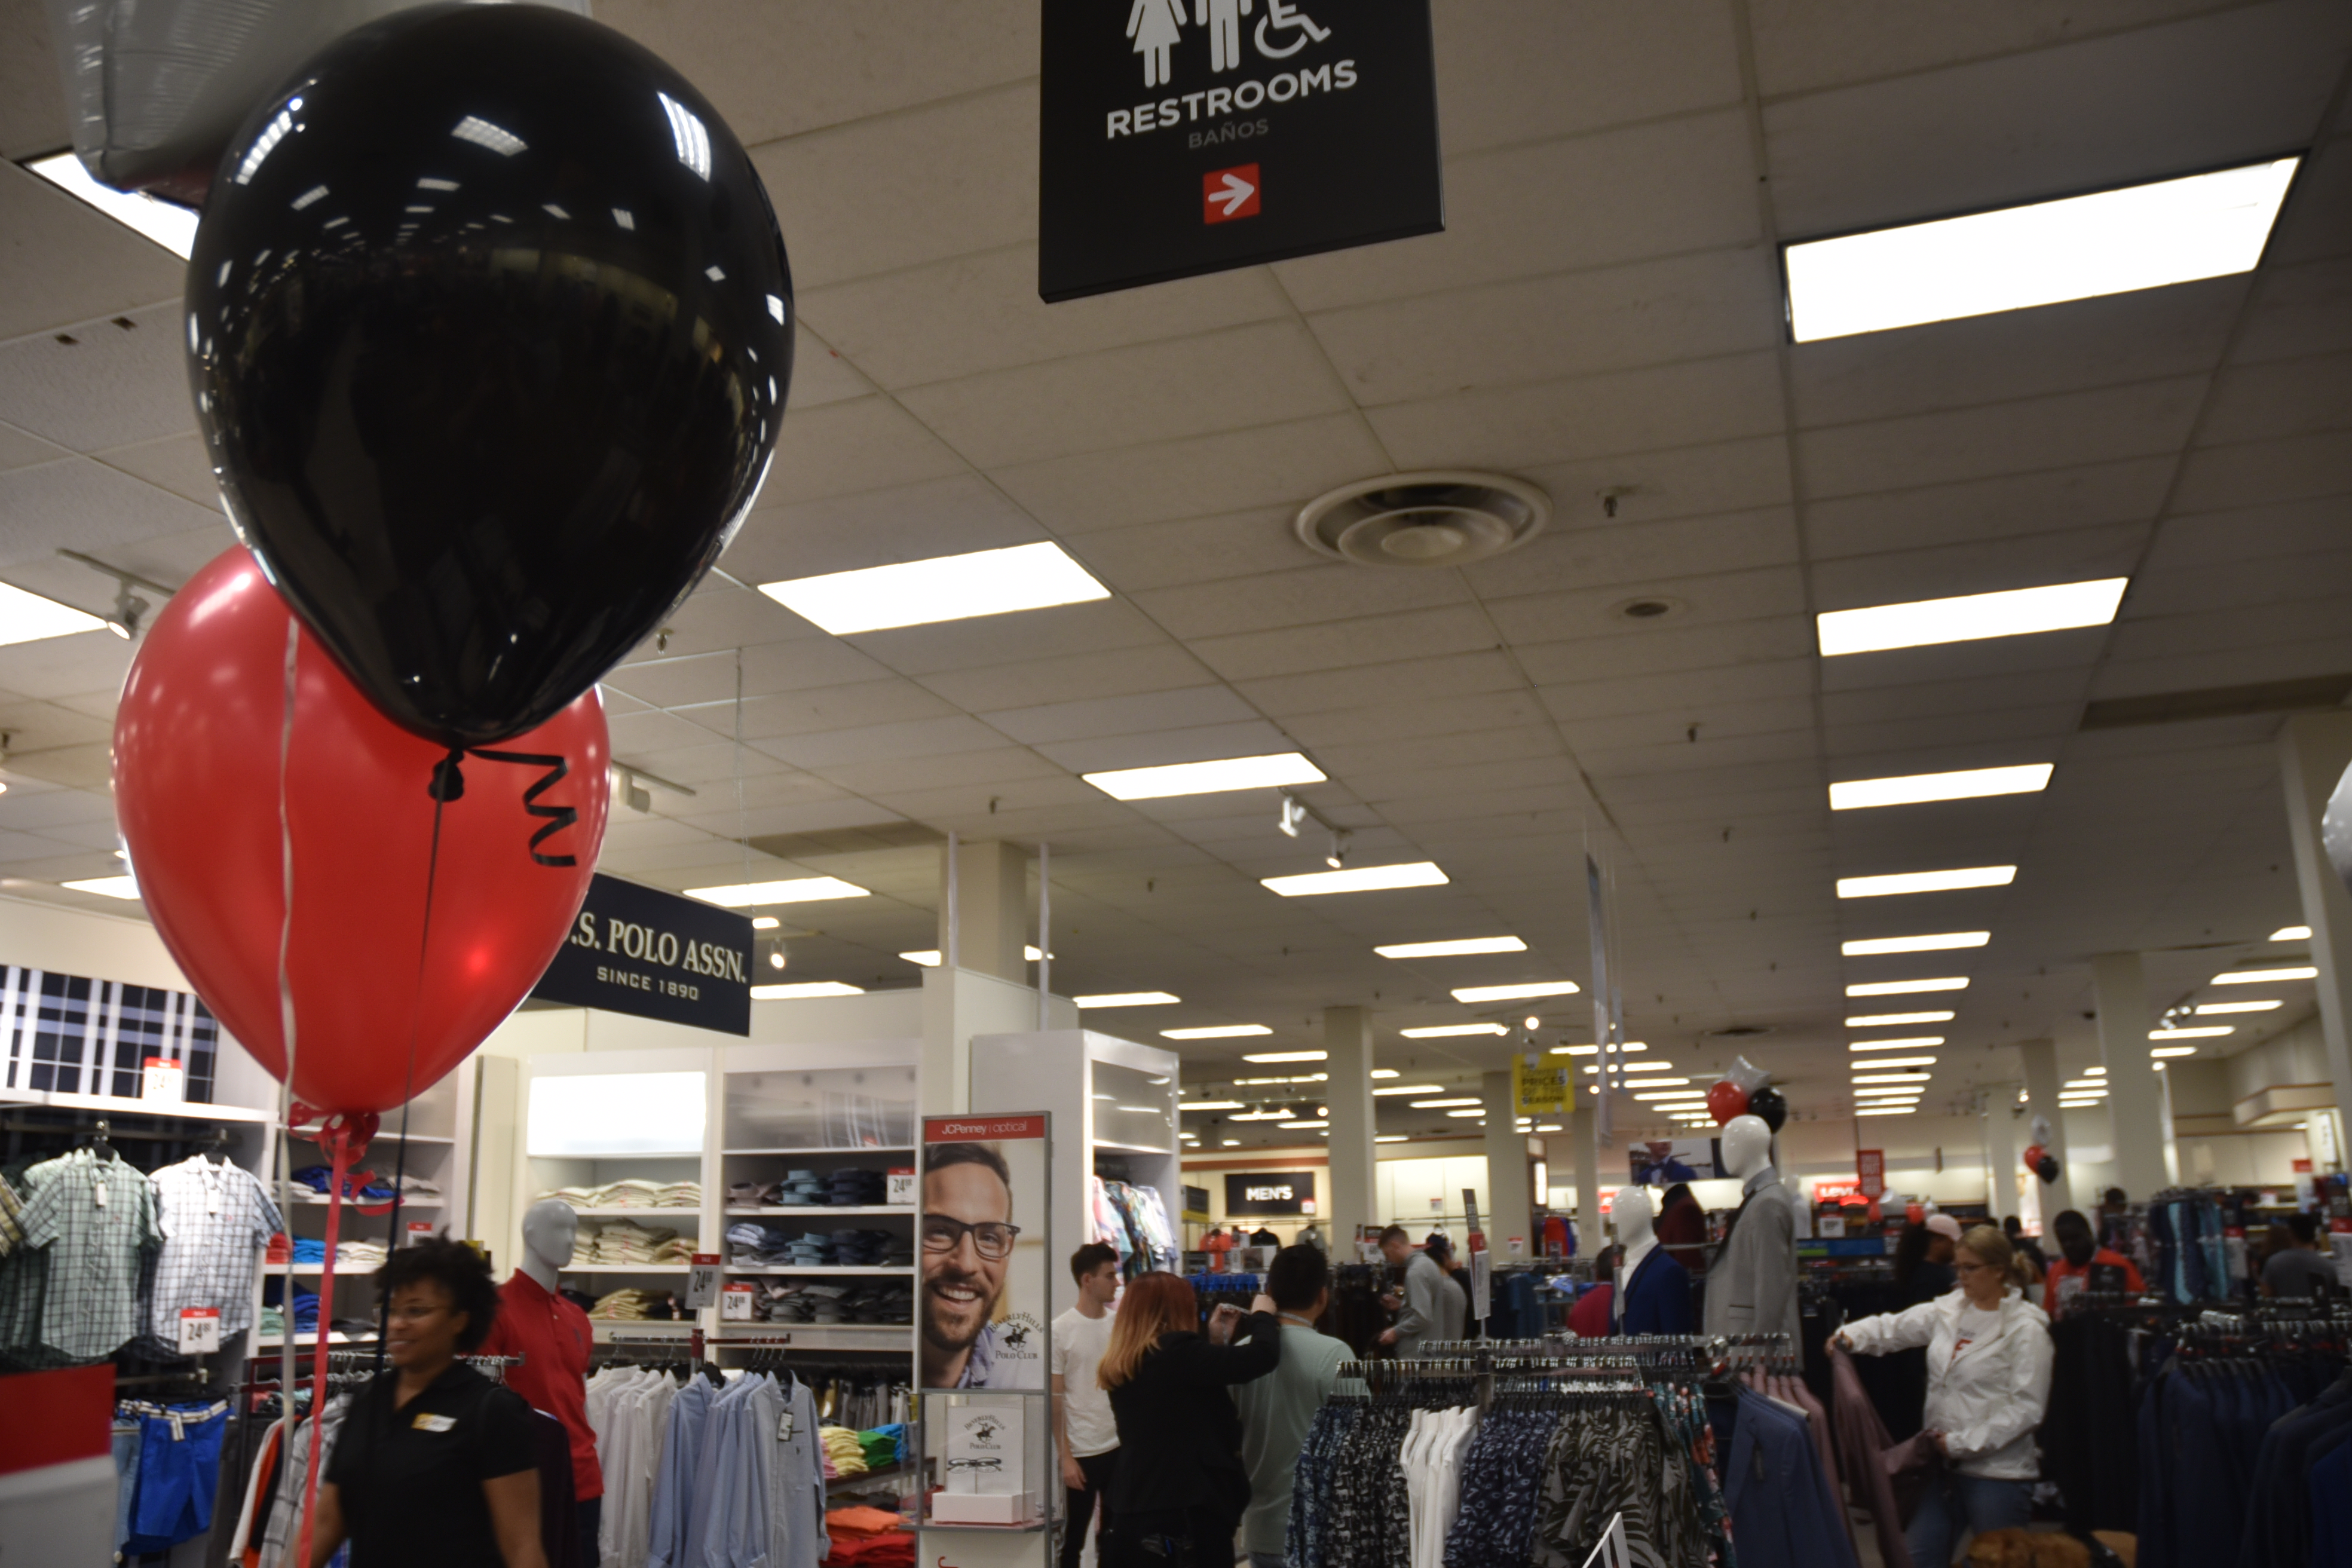 About 250 students from San Joaquin Delta College and the University of the Pacific participated in the Suit-Up event at JCPenney.